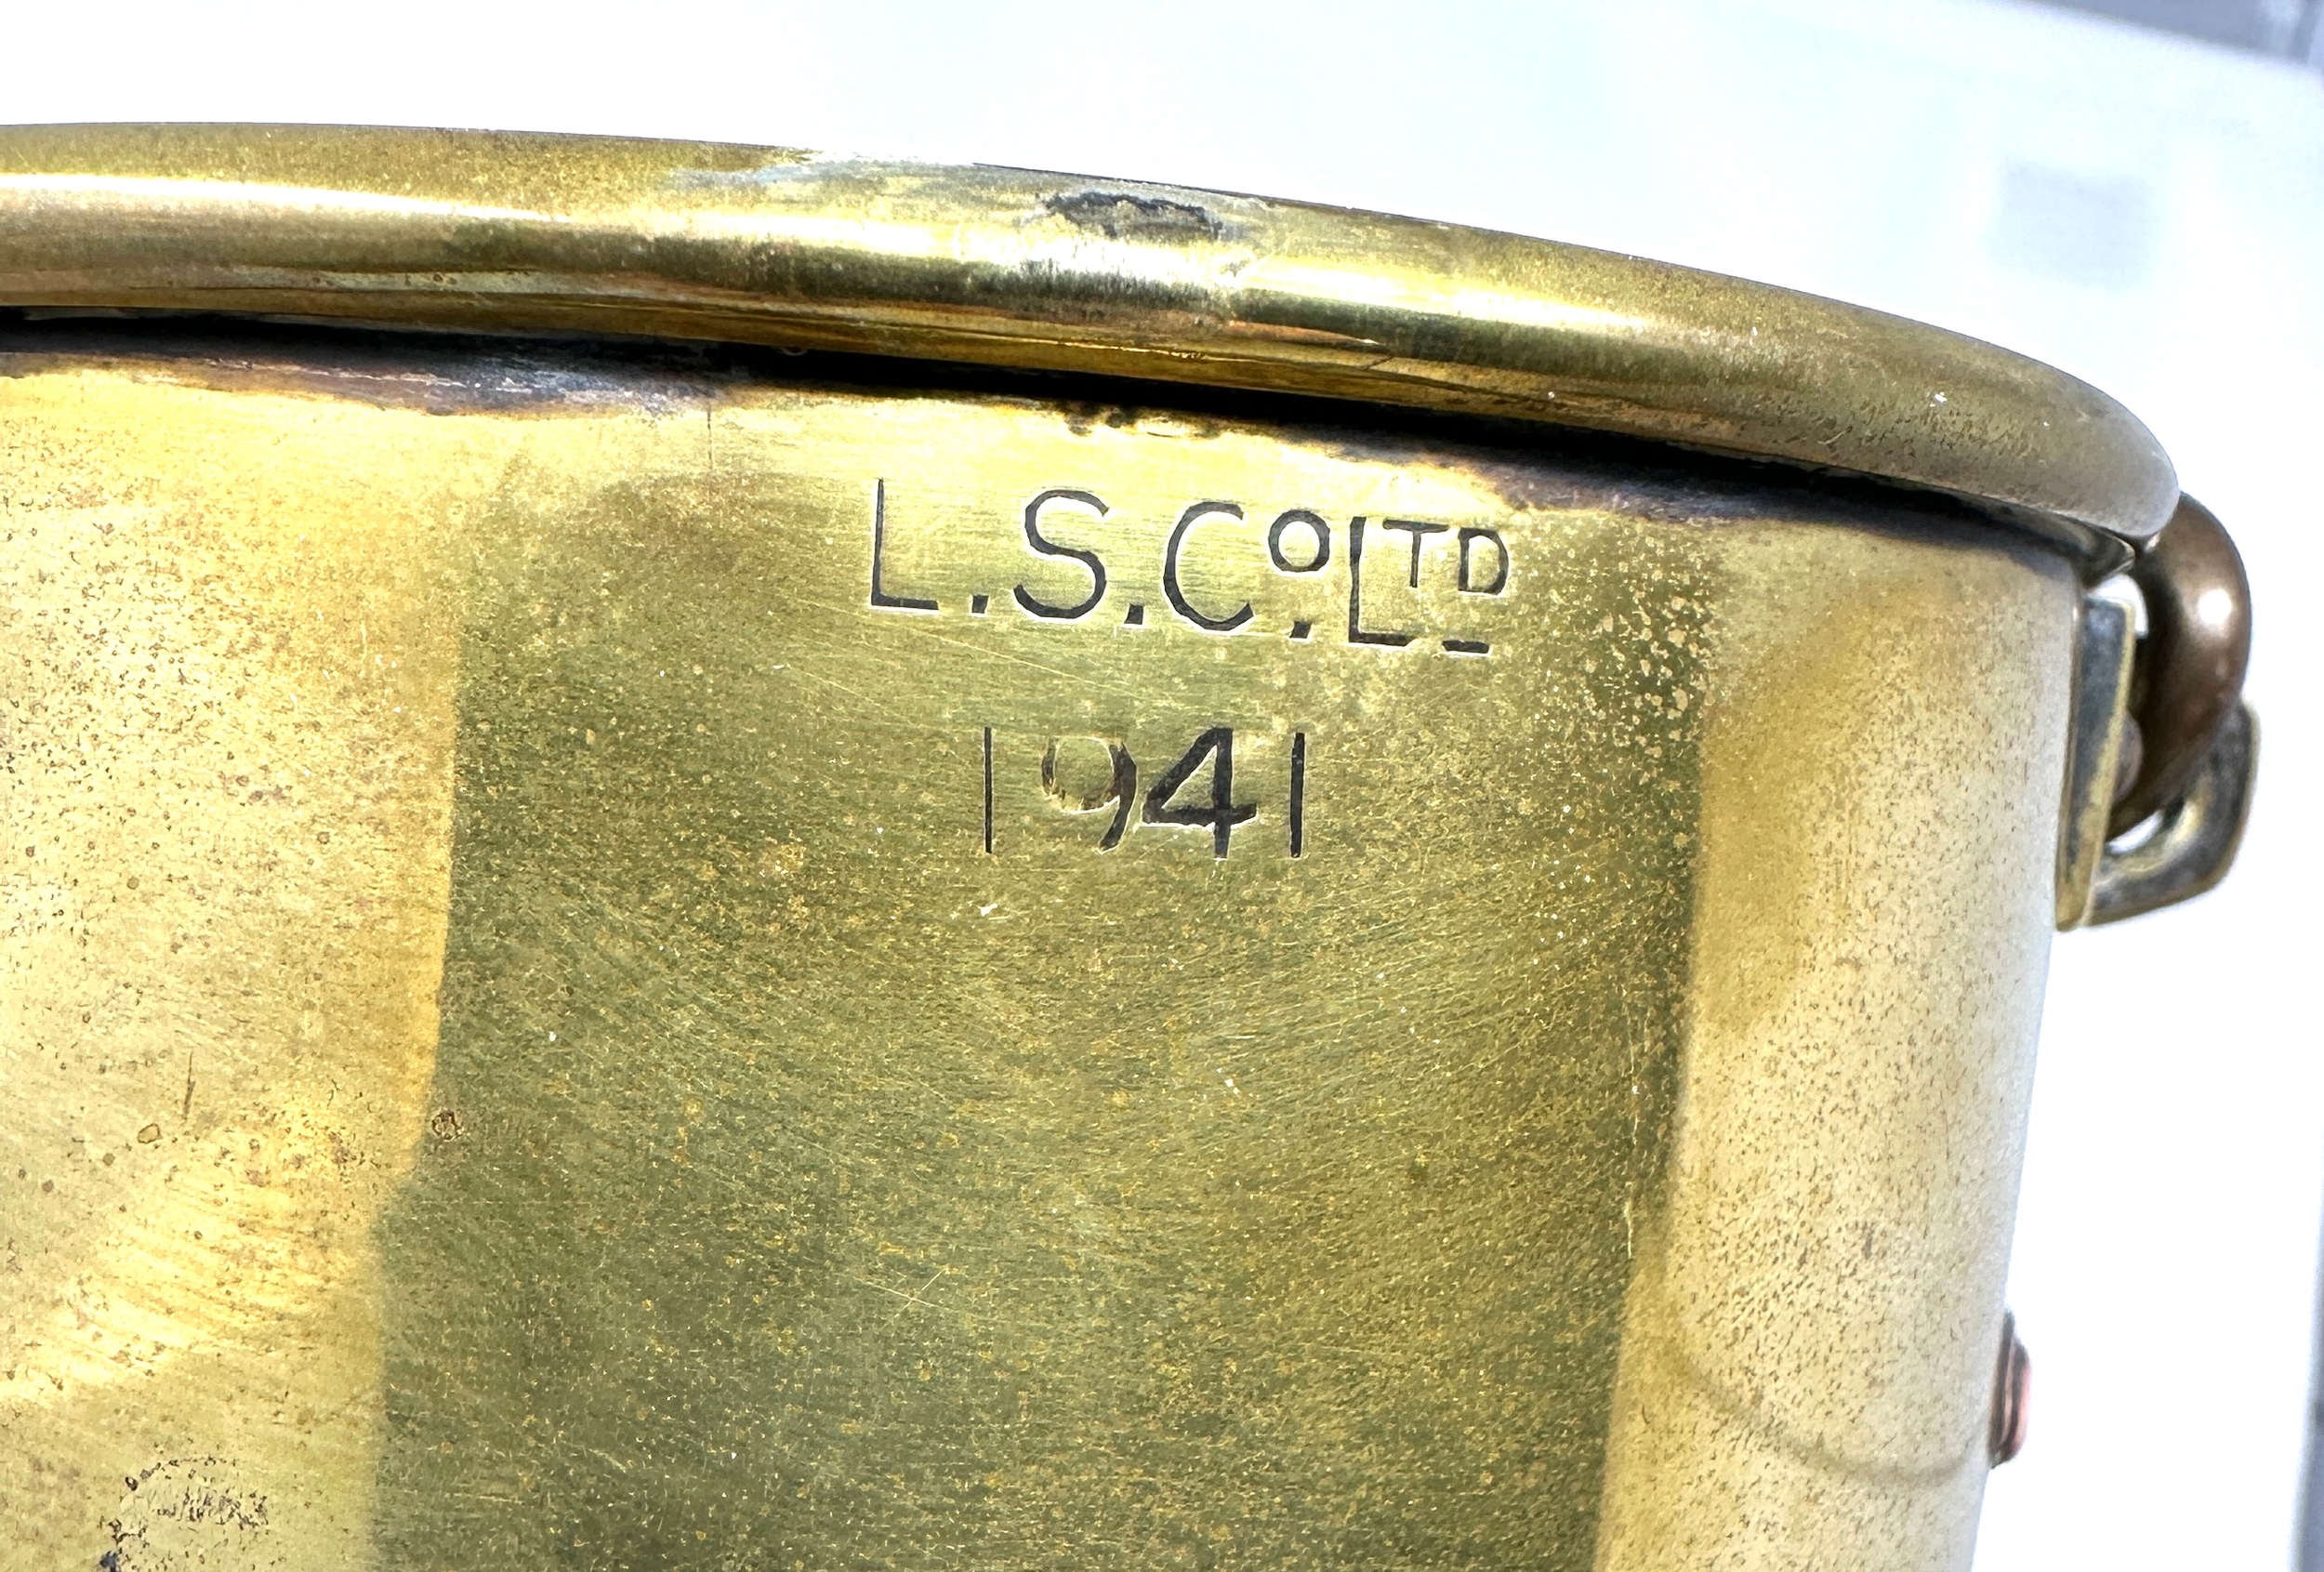 Large Circa 1941 Brass Lantern Named L.S.Co Ltd 1941 measures approx 41cm tall - Image 4 of 9